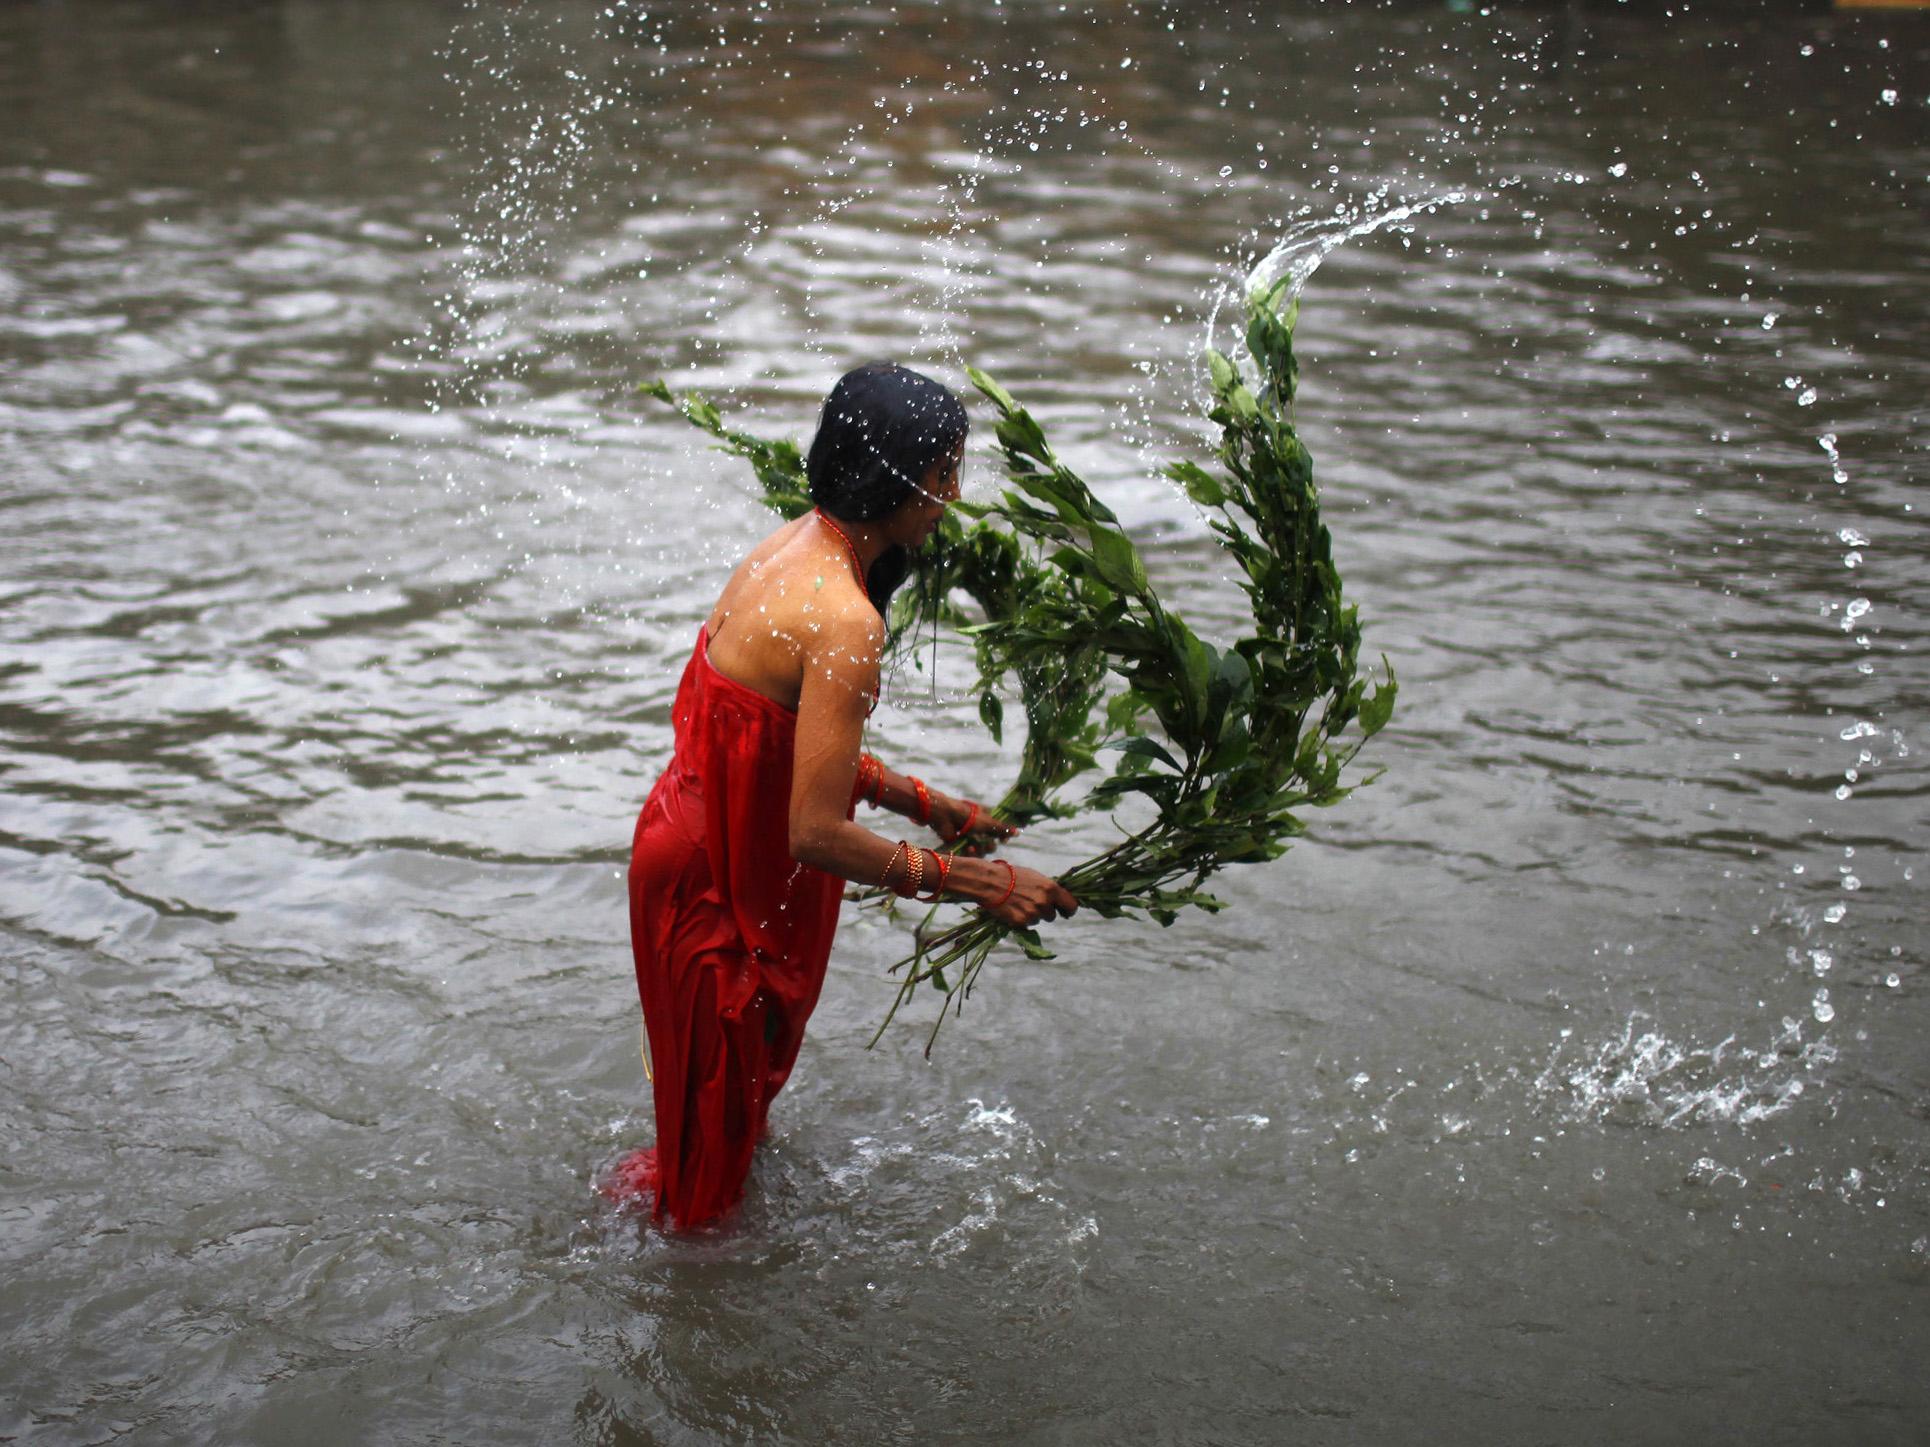 A Nepalese woman lashes herself with the leaves of an Aghada herb as part of a ritual in the Bagmati River during Rishi Panchami, a day when Hindu women perform rituals to wash away sins committed during their menstruation period